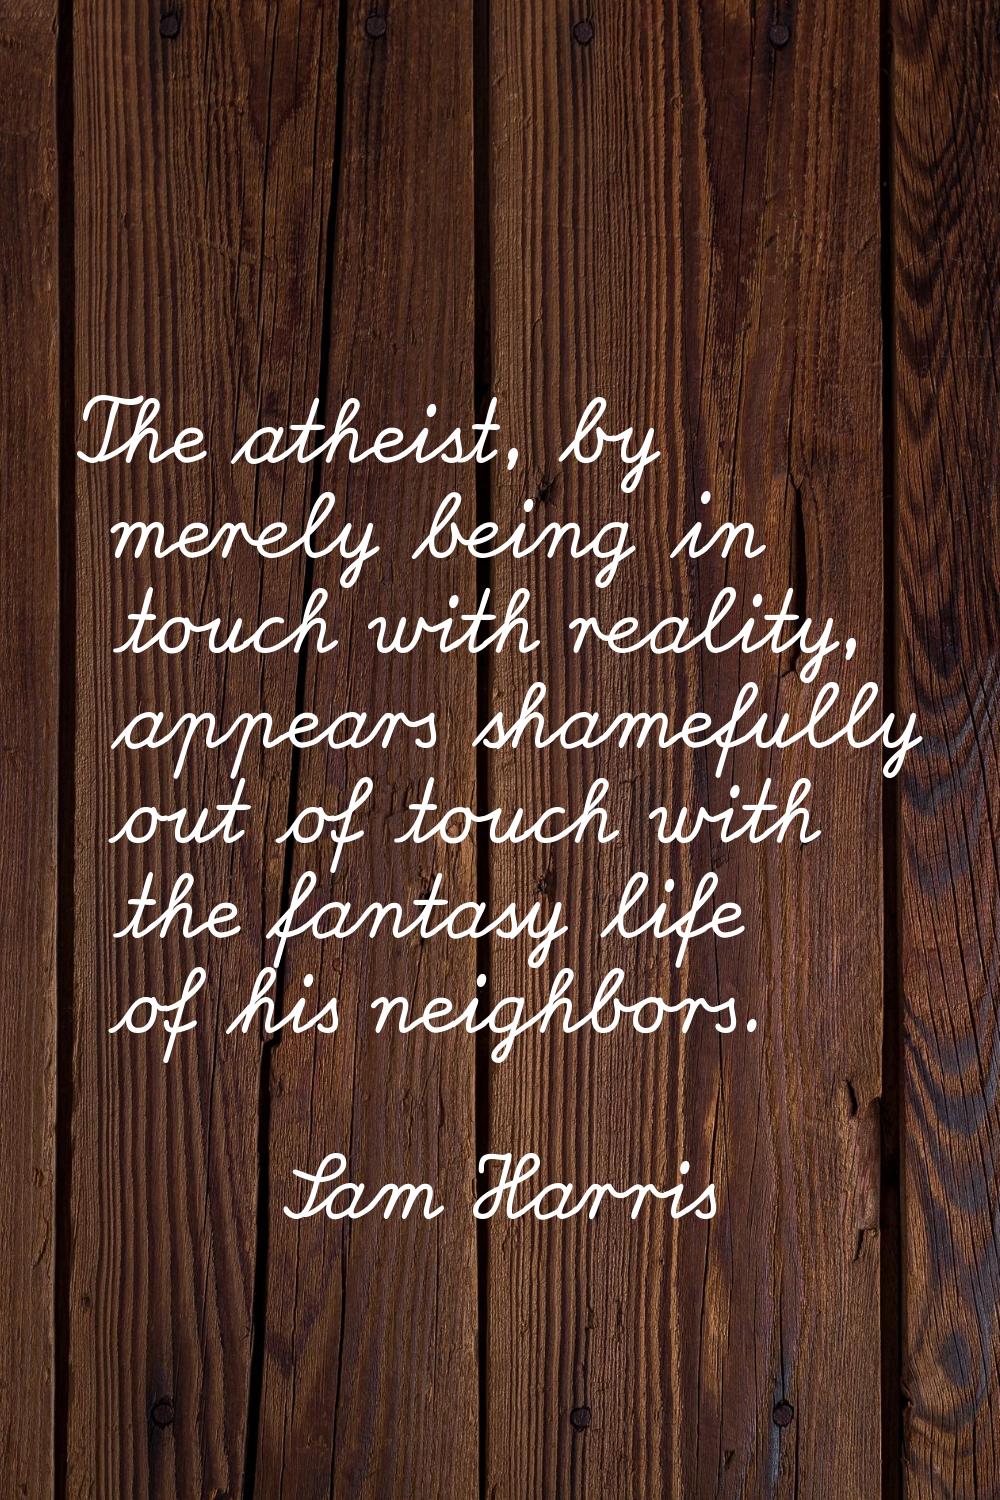 The atheist, by merely being in touch with reality, appears shamefully out of touch with the fantas